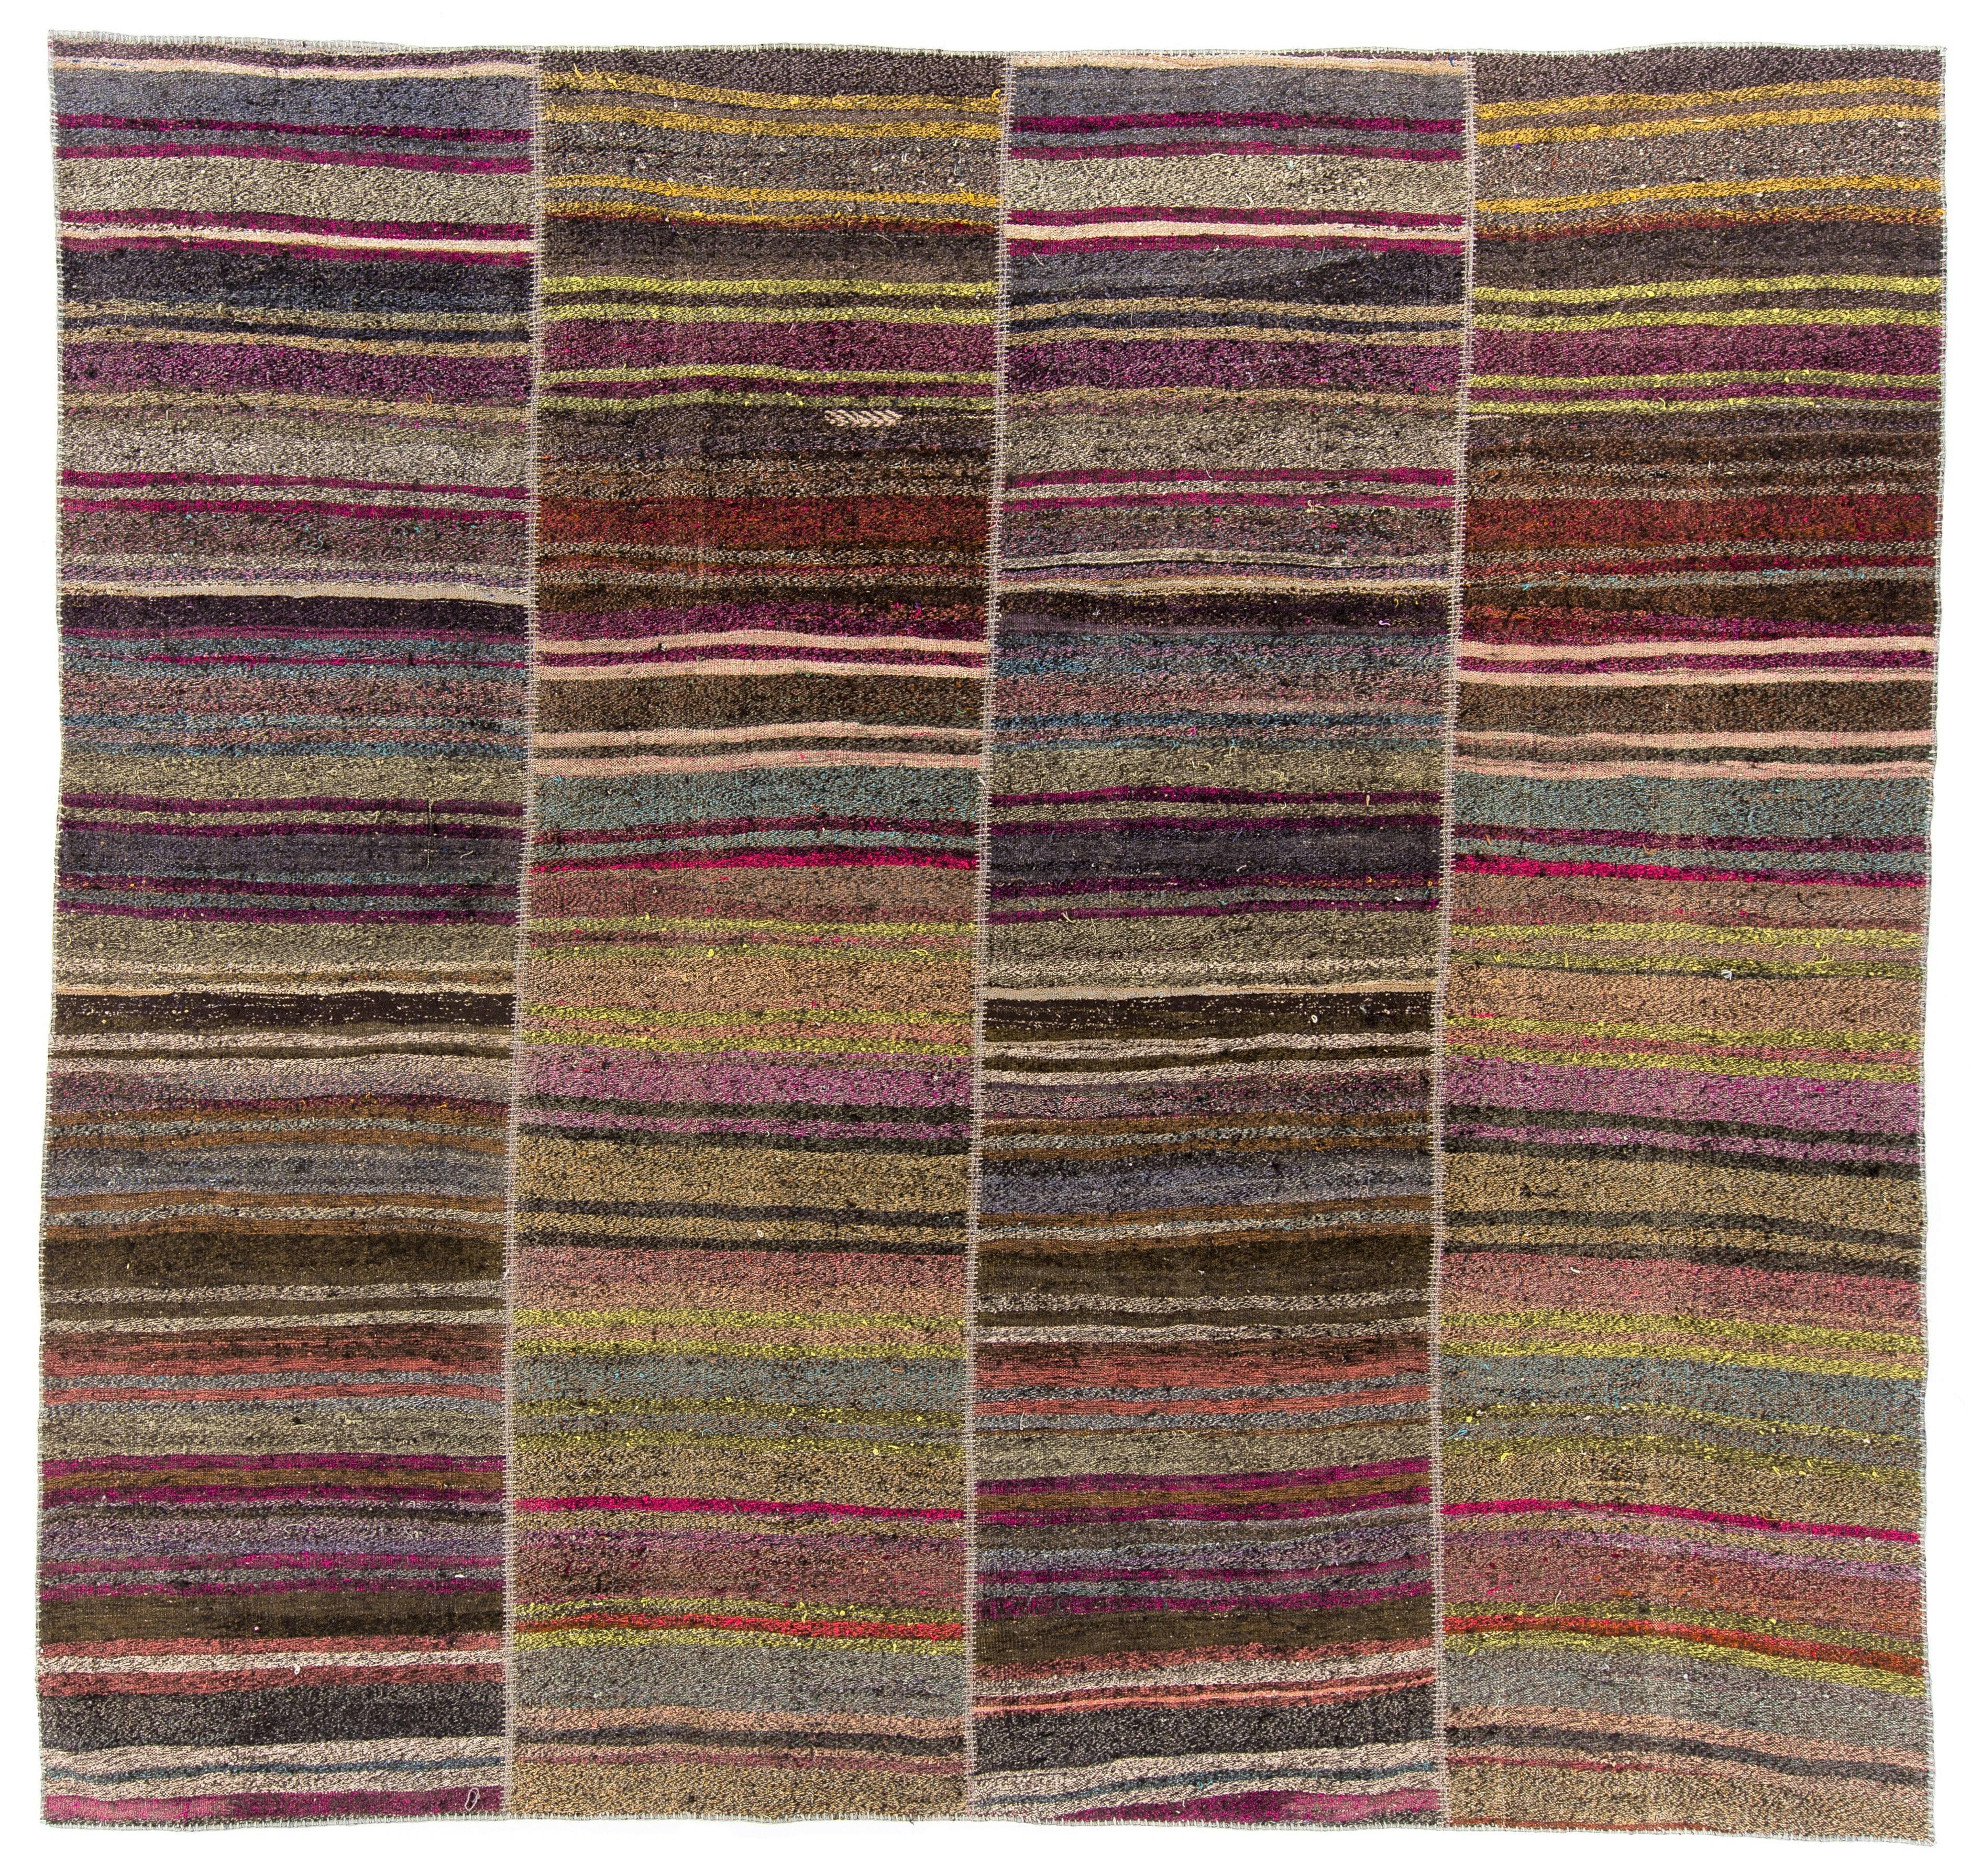 Size: 10'6" x 11' (Adjustable).

These authentic flat-weaves (Kilims) from Eastern Turkey were handwoven by Nomads in mid-20th century to be used as floor coverings in their tents.

They were made to use for everyday life rather than